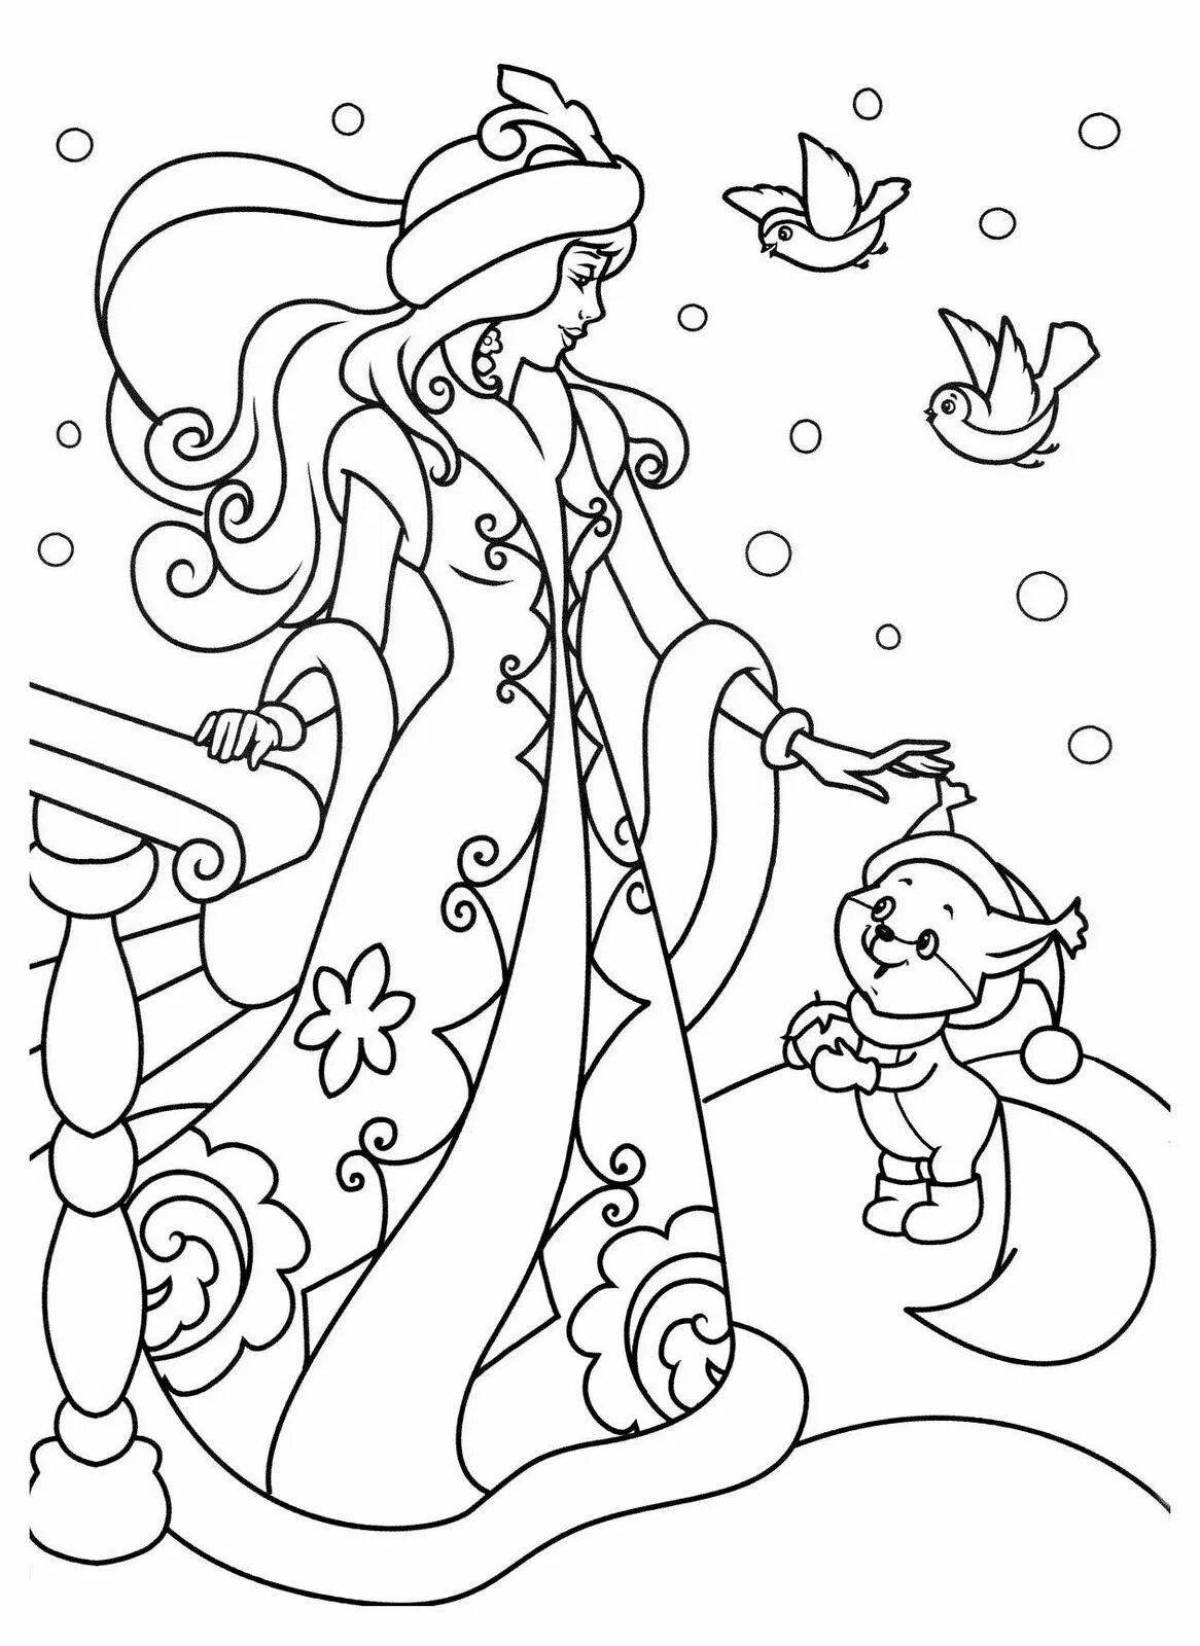 Playable snow maiden coloring page